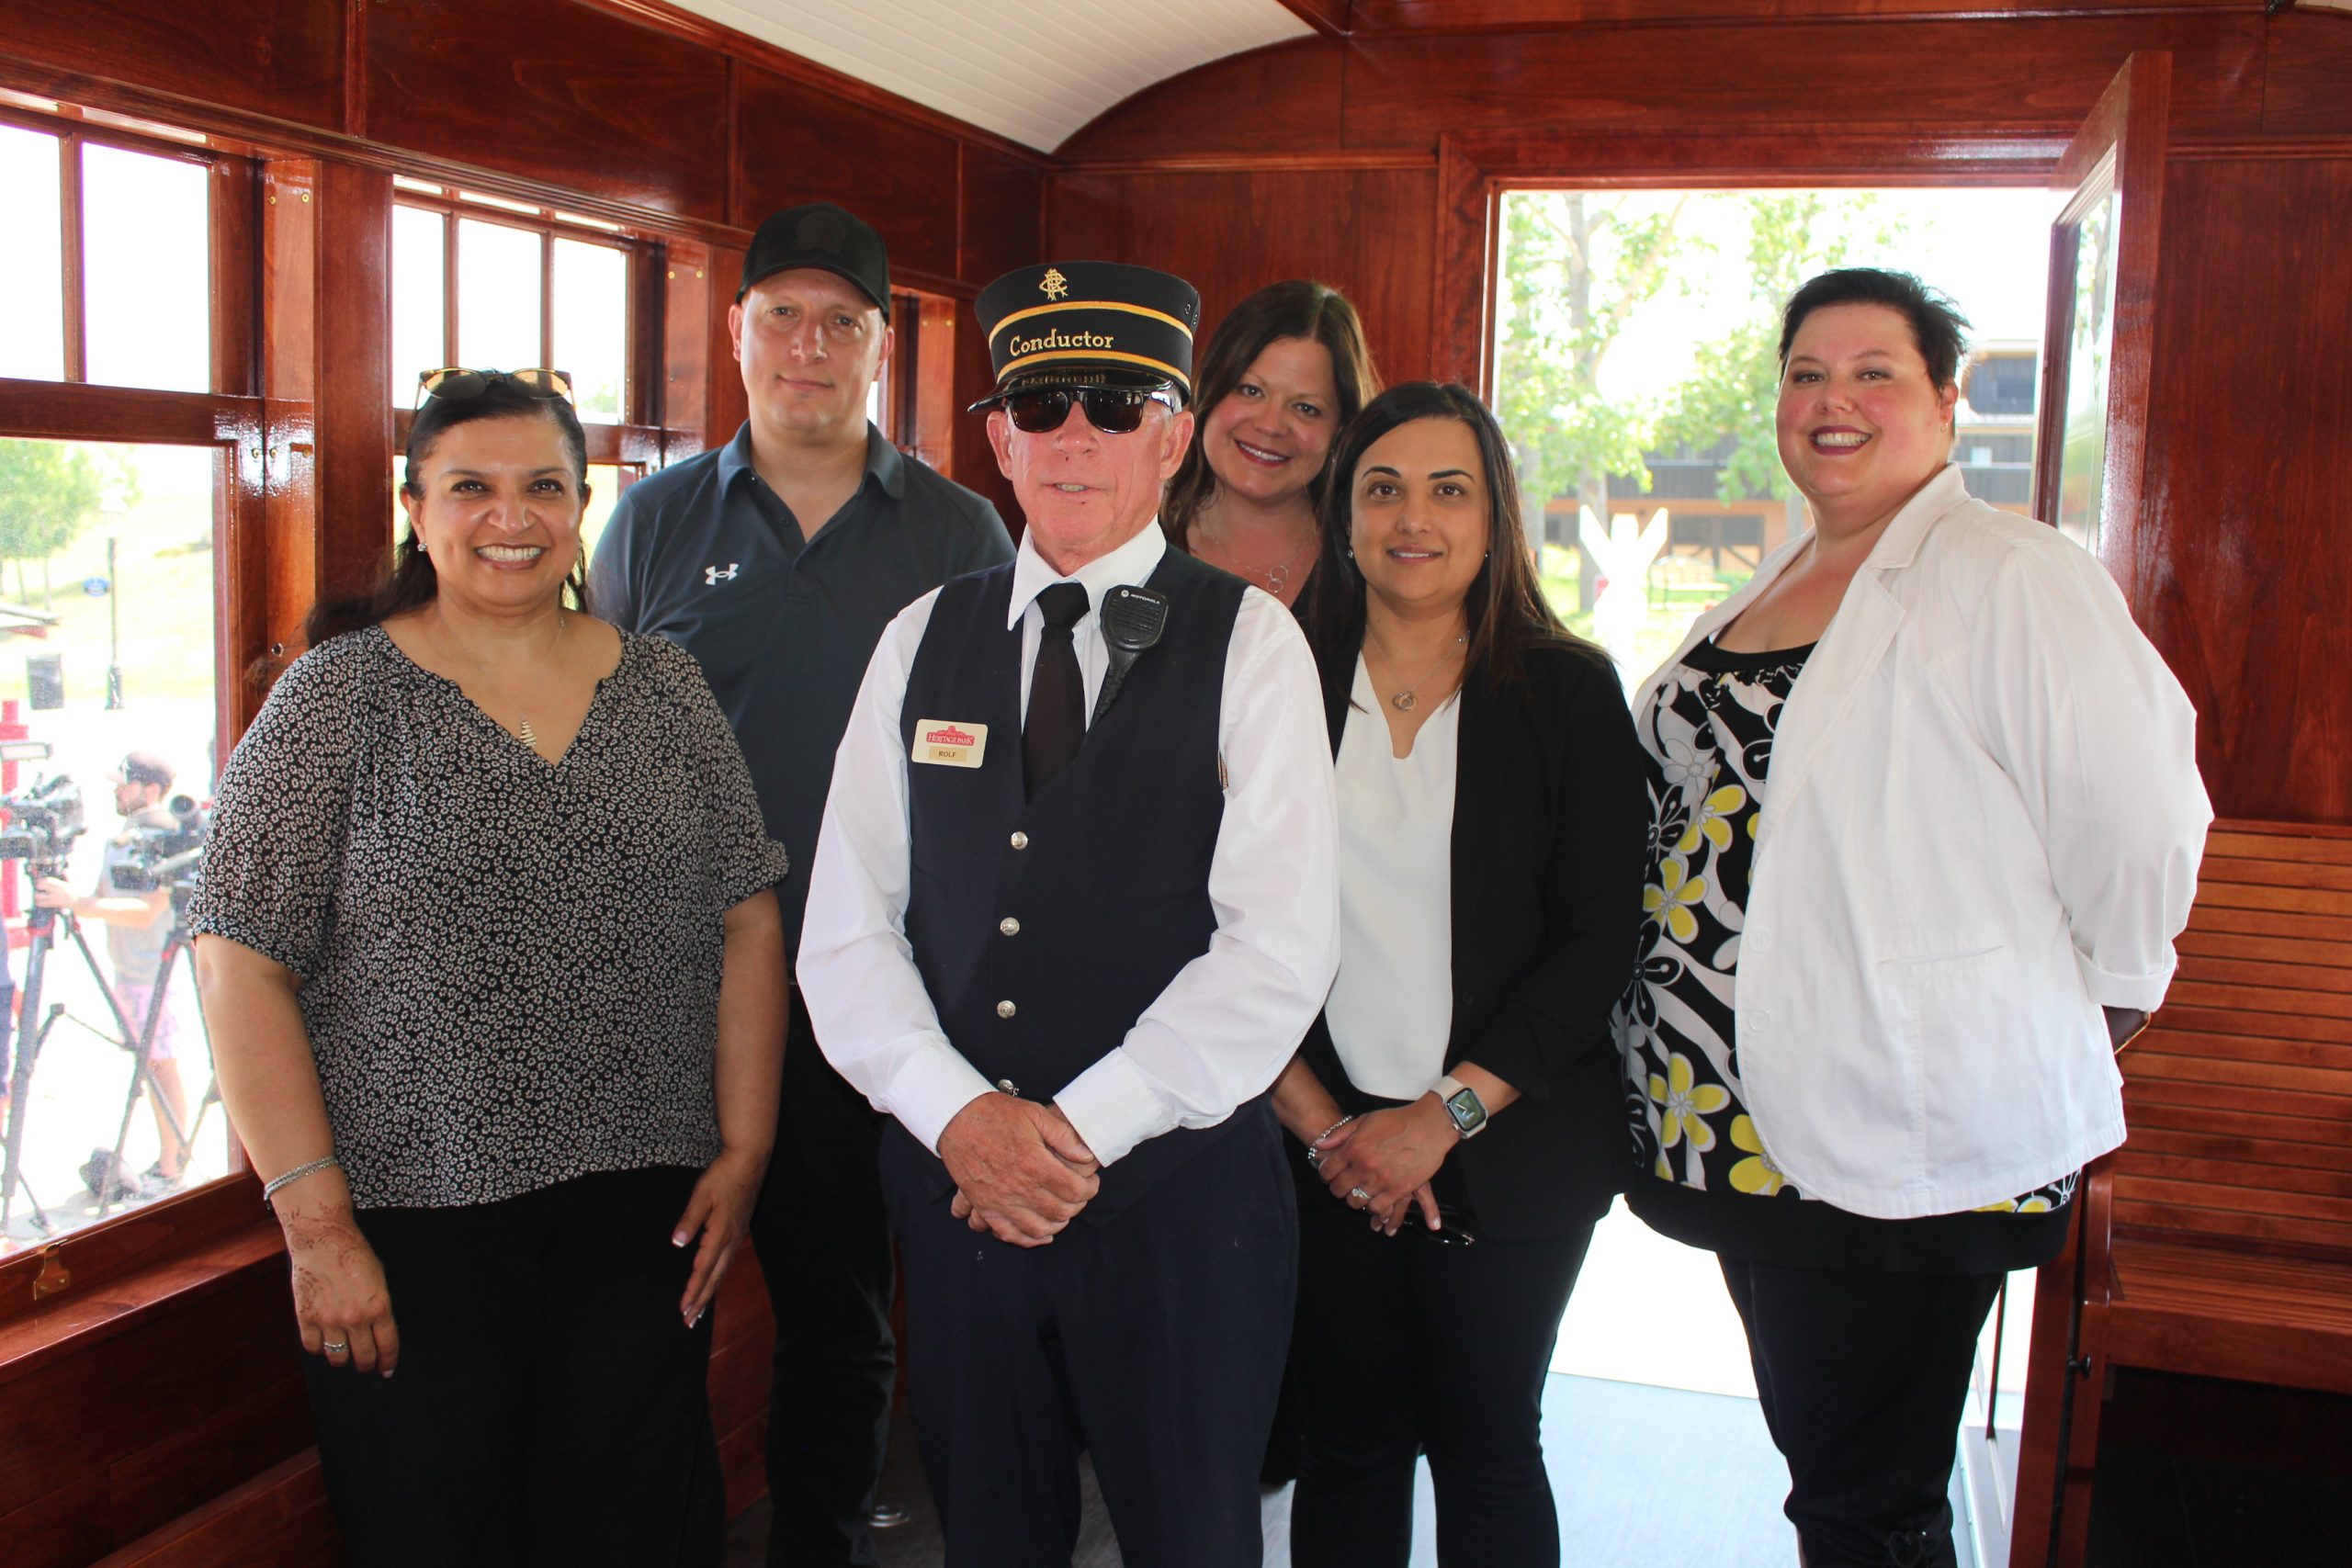 CPKC Team posing with Heritage Park's conductor on the new fully-accessible railcar, The Nightingale.